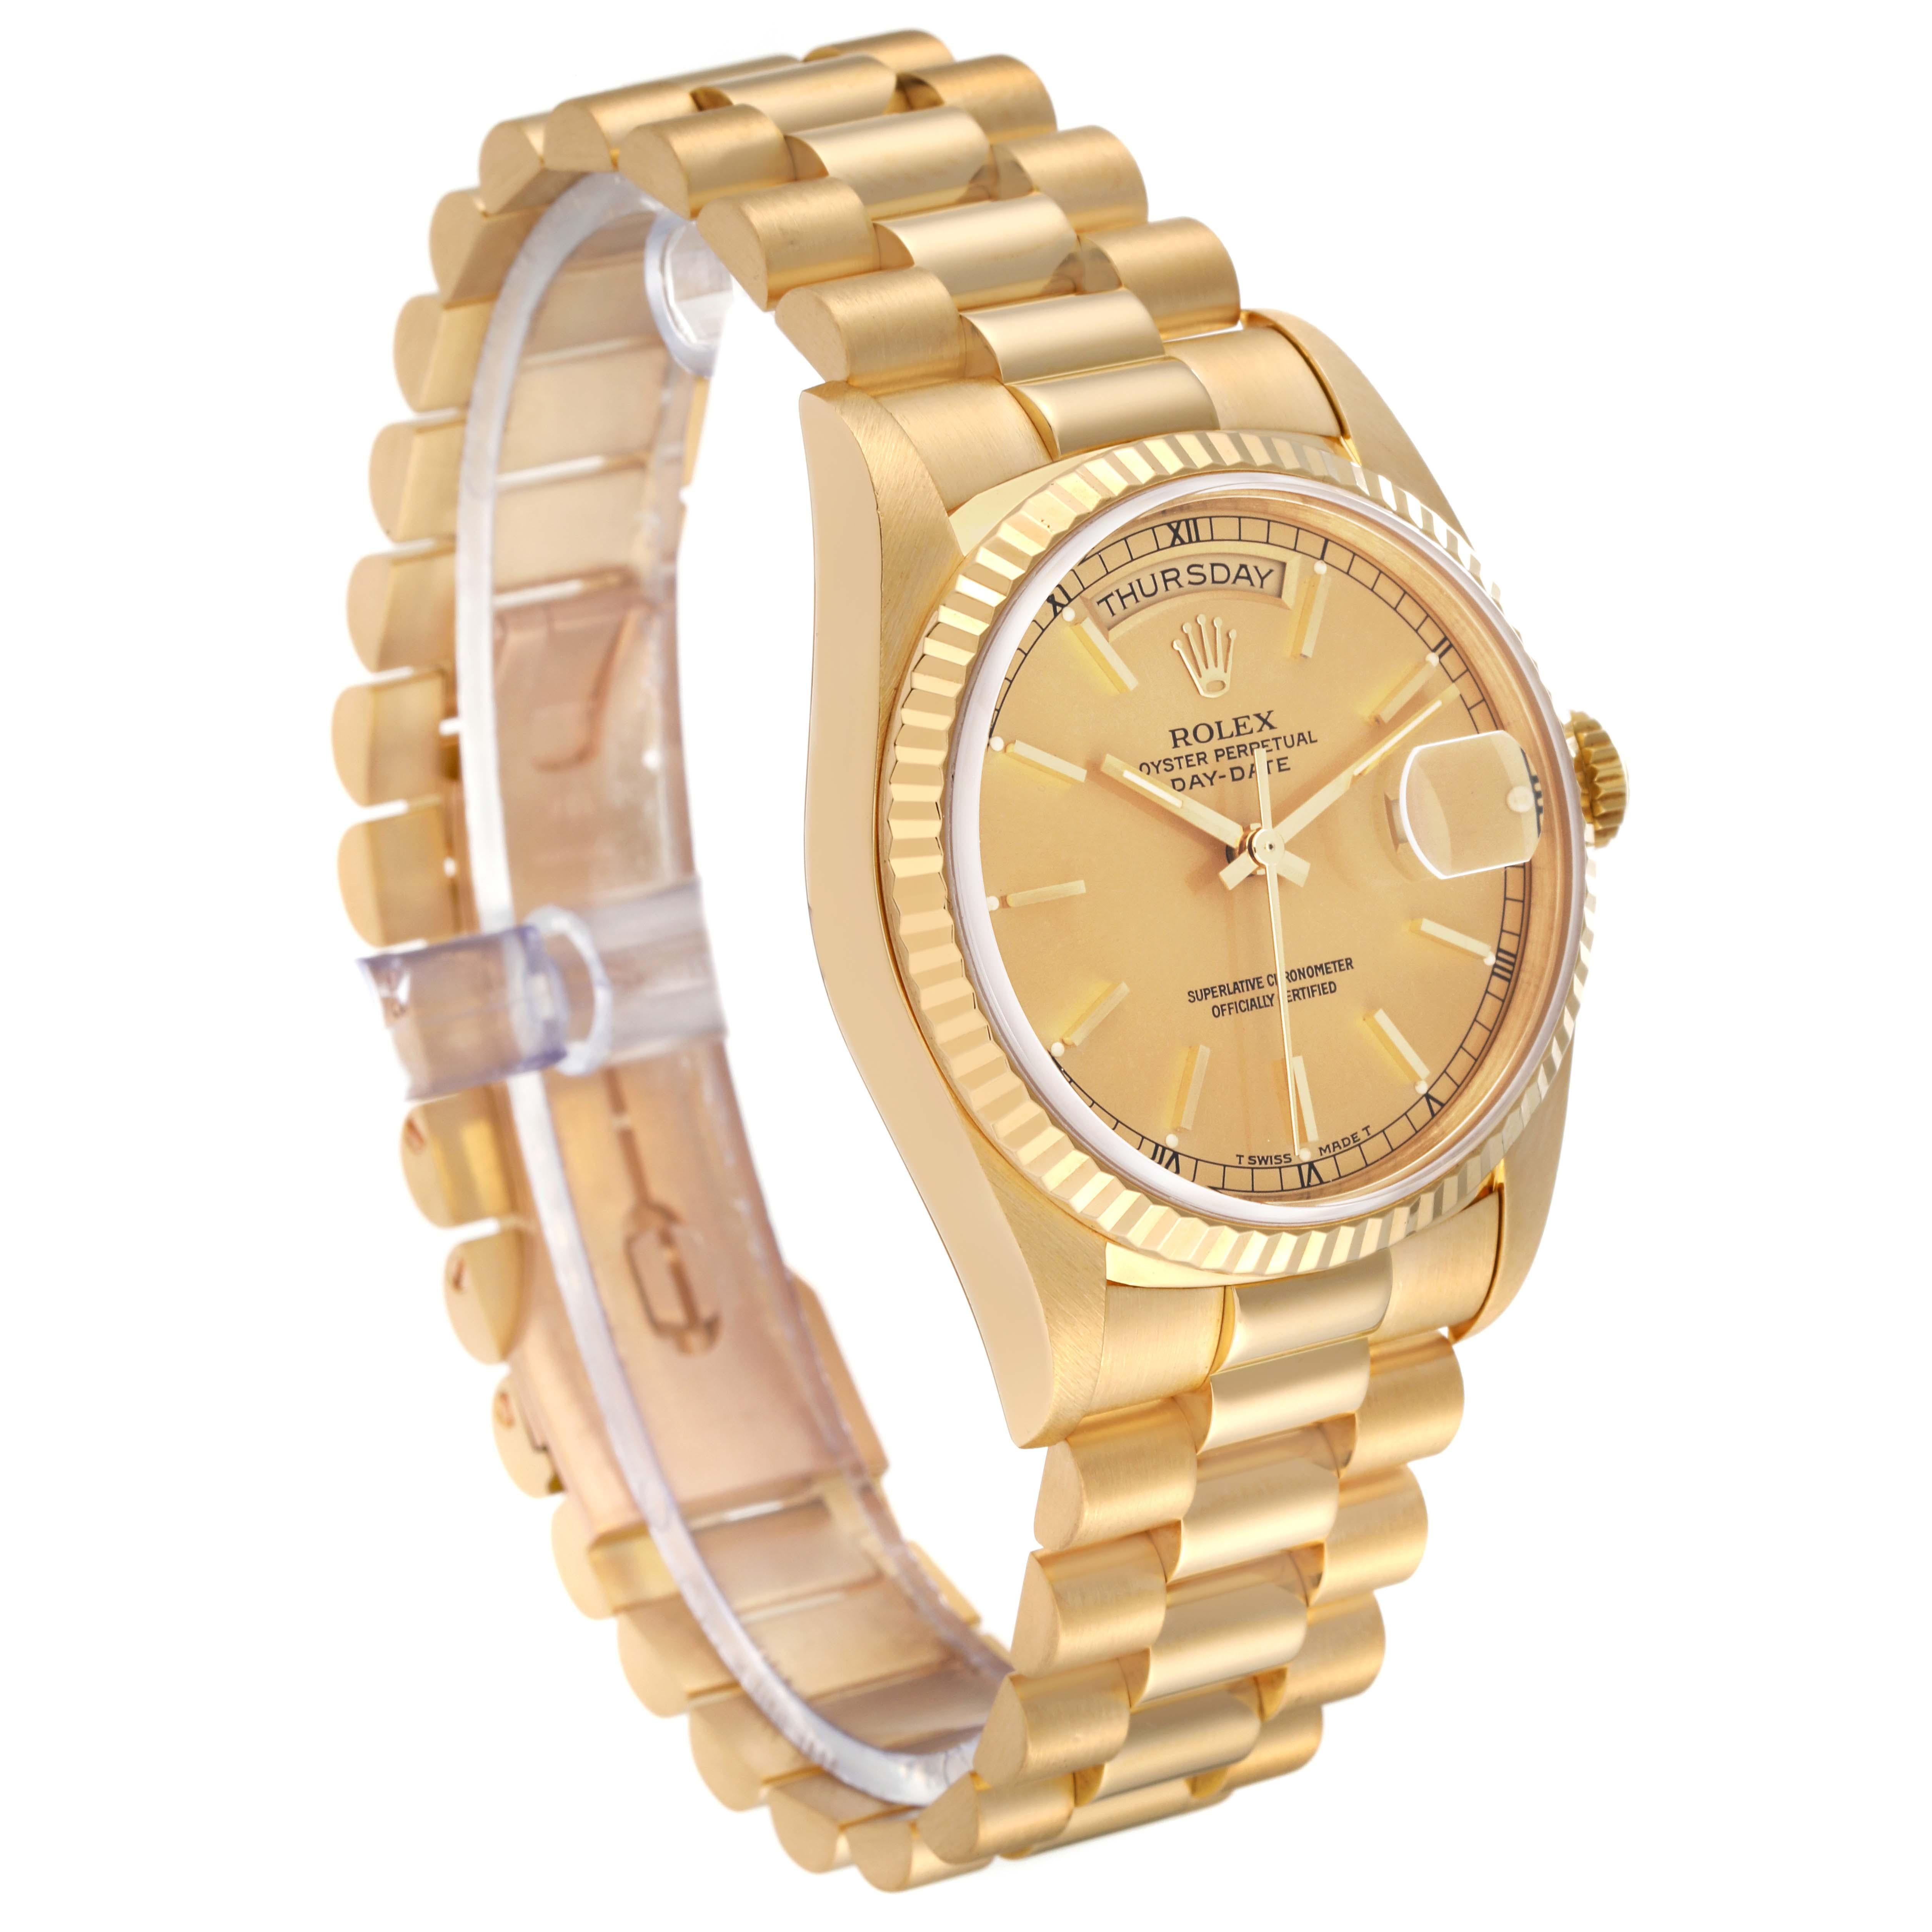 Men's Rolex President Day-Date Yellow Gold Champagne Dial Mens Watch 18238 Box Papers